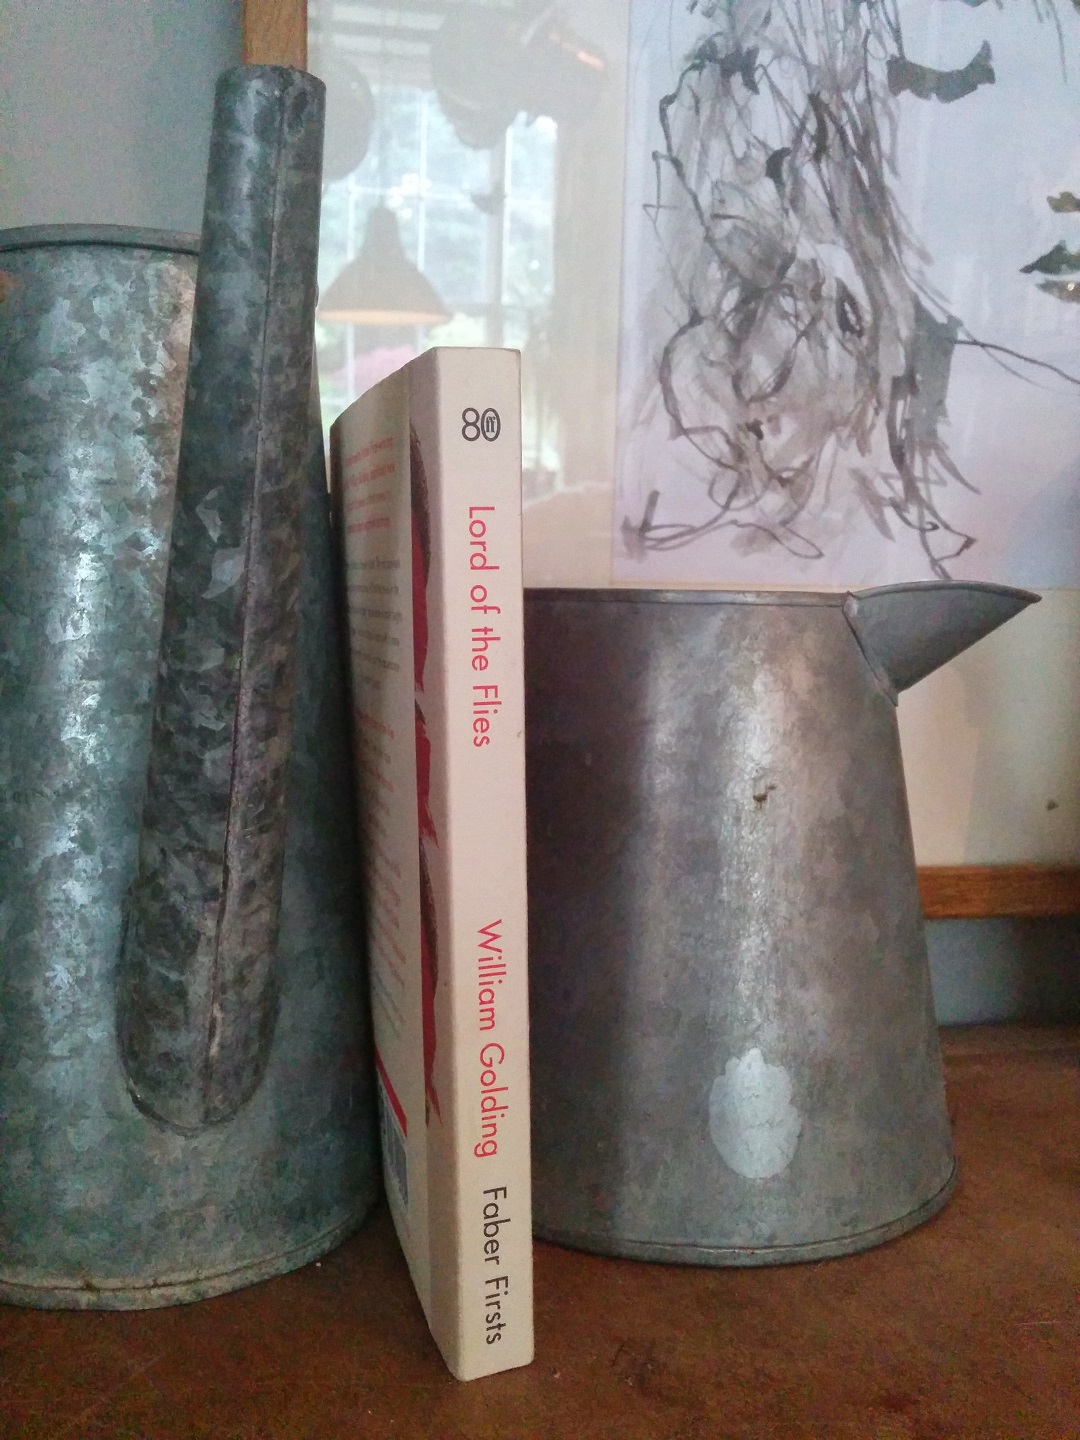 book-review-the-lord-of-the-flies-propped-metal-jug